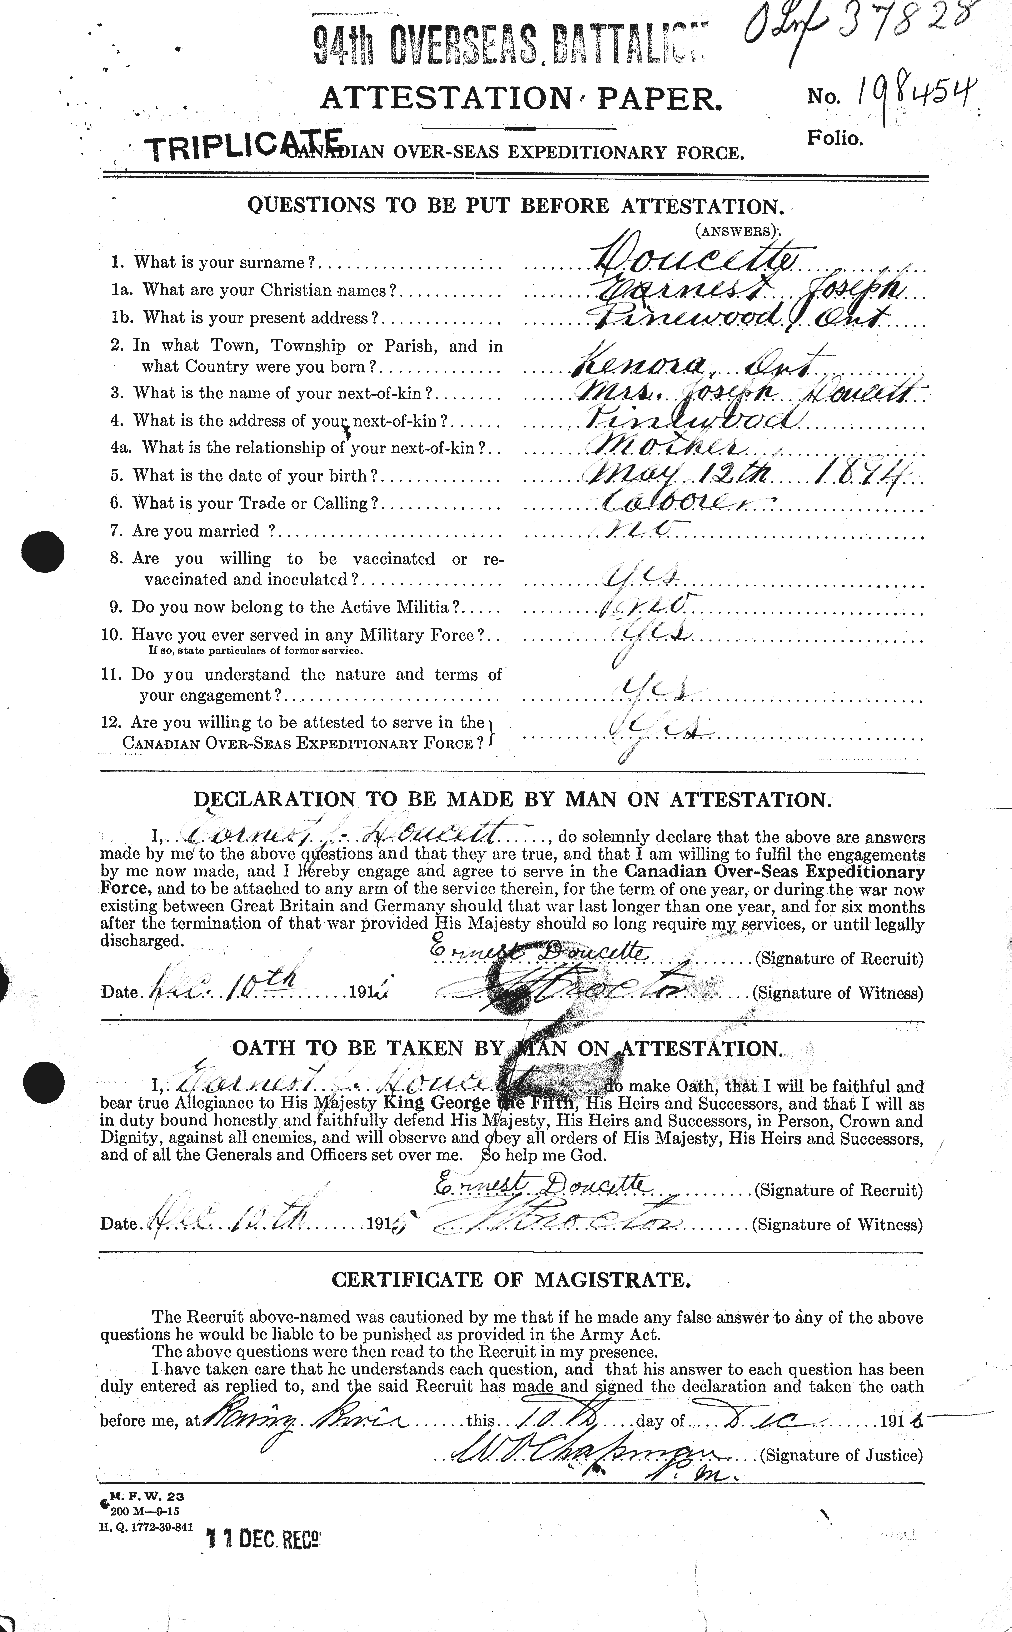 Personnel Records of the First World War - CEF 294066a